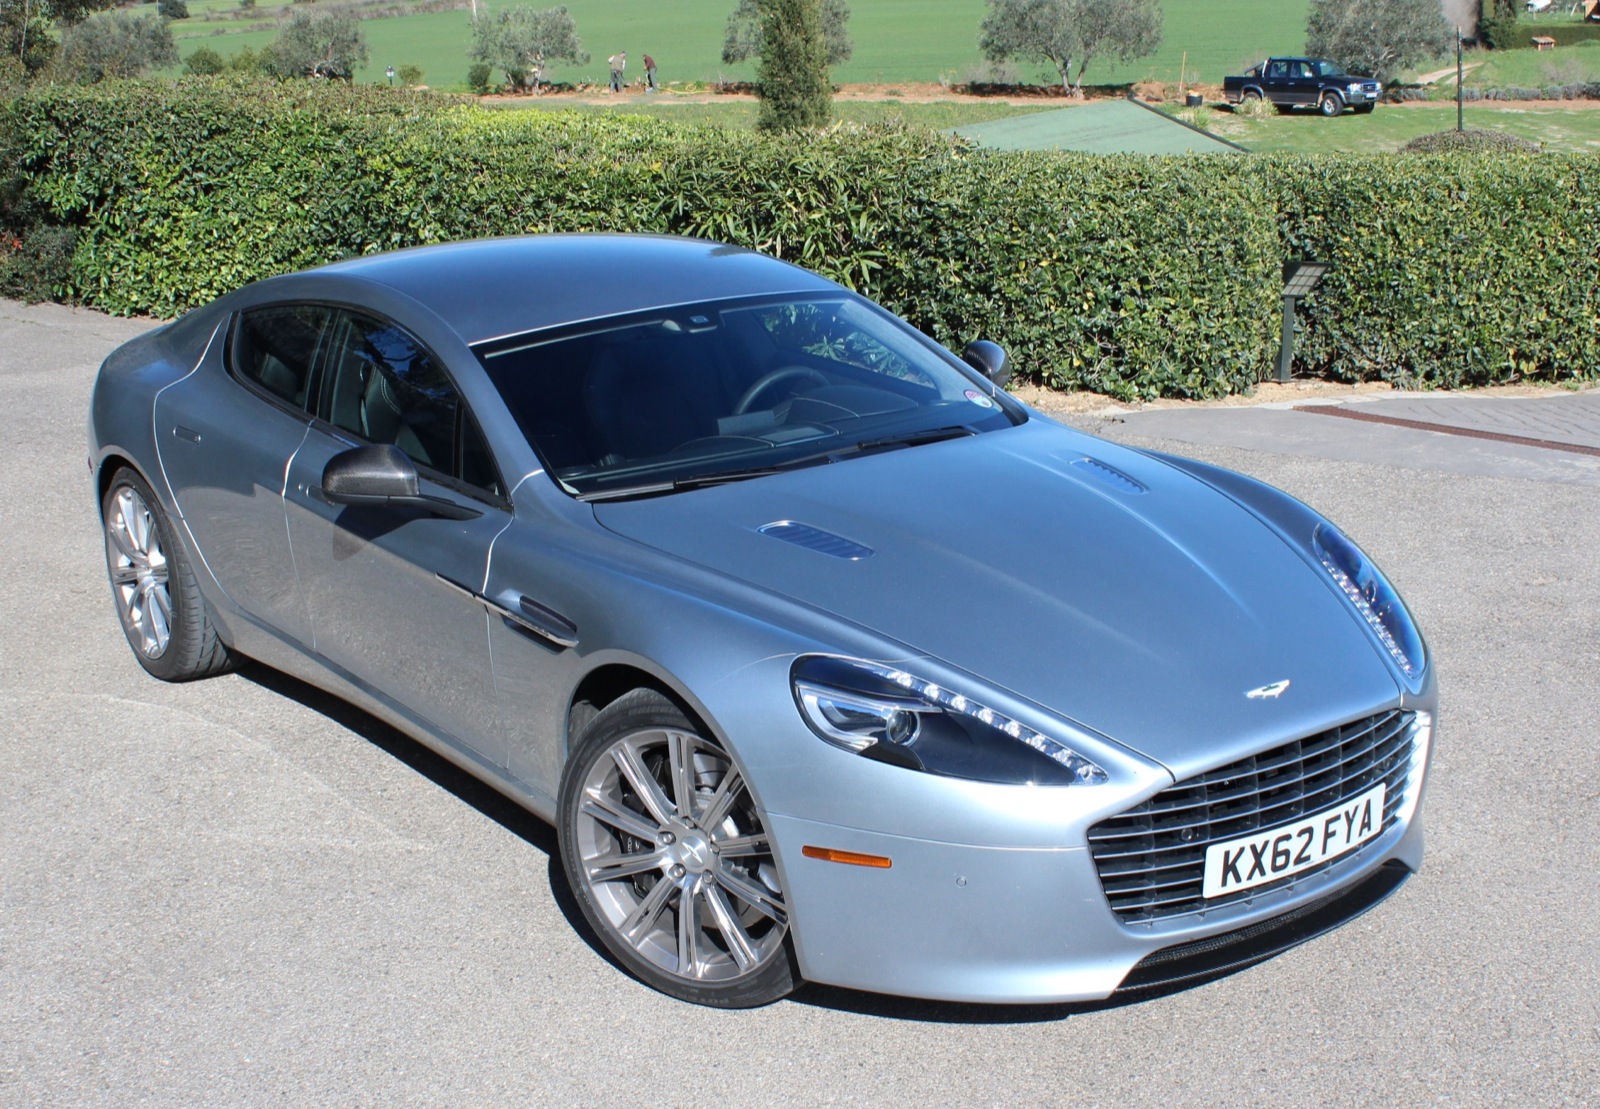 2014 Aston Martin Rapide S first drive review